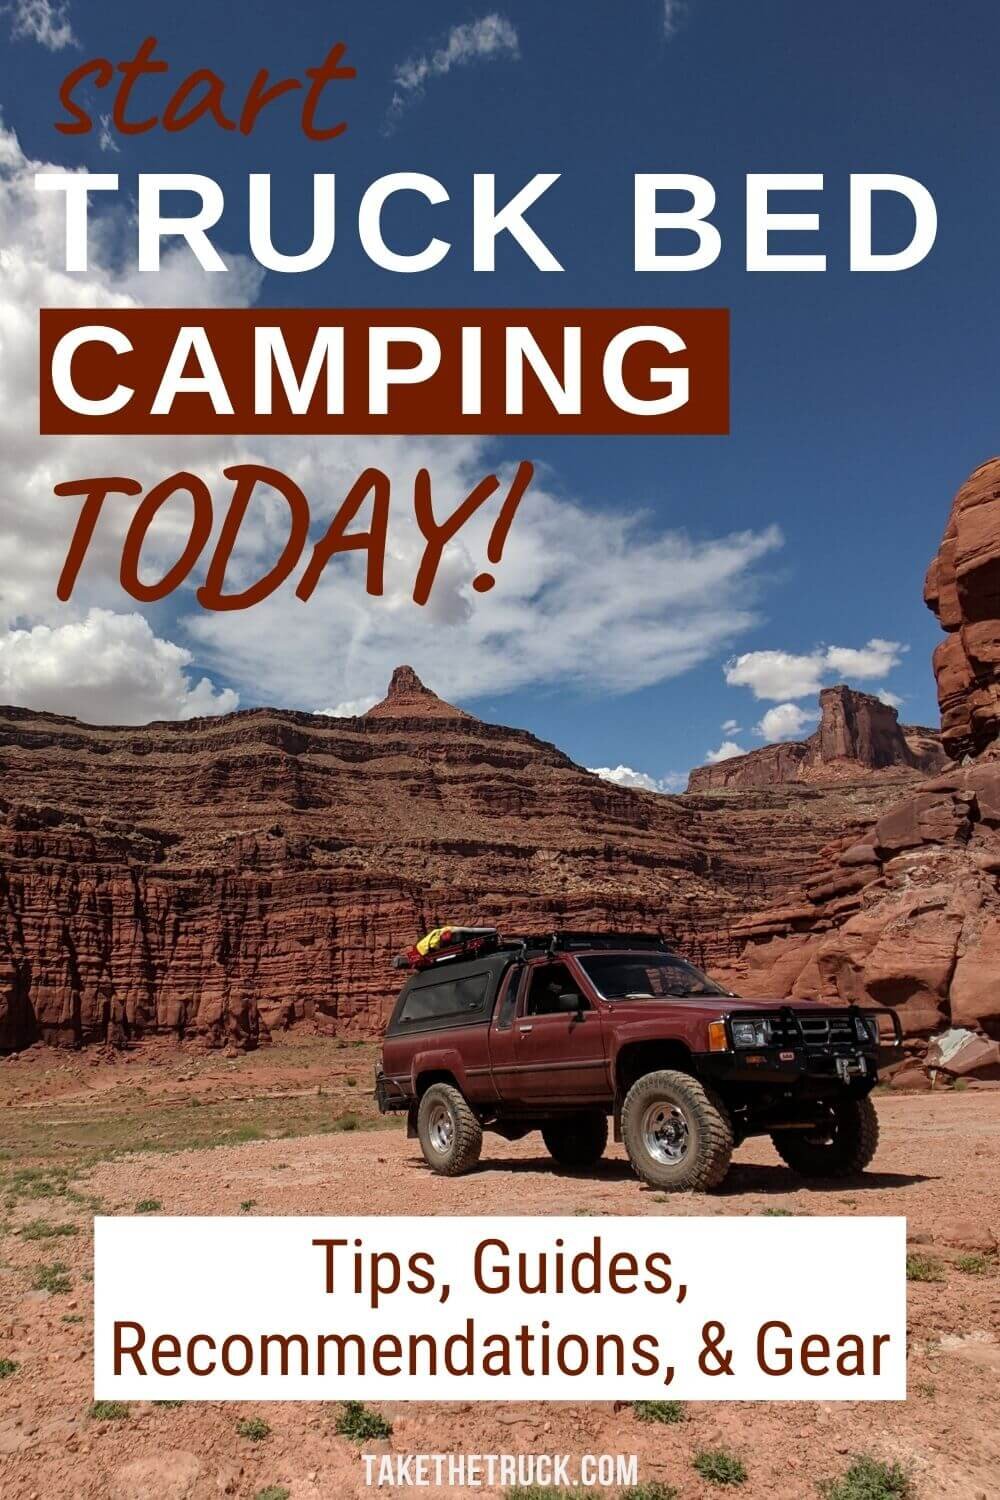 This post is full of all you need to get started truck bed camping or truck shell camping from your pickup - truck camping tips, simple setup ideas, advice on wild camping, plus more!